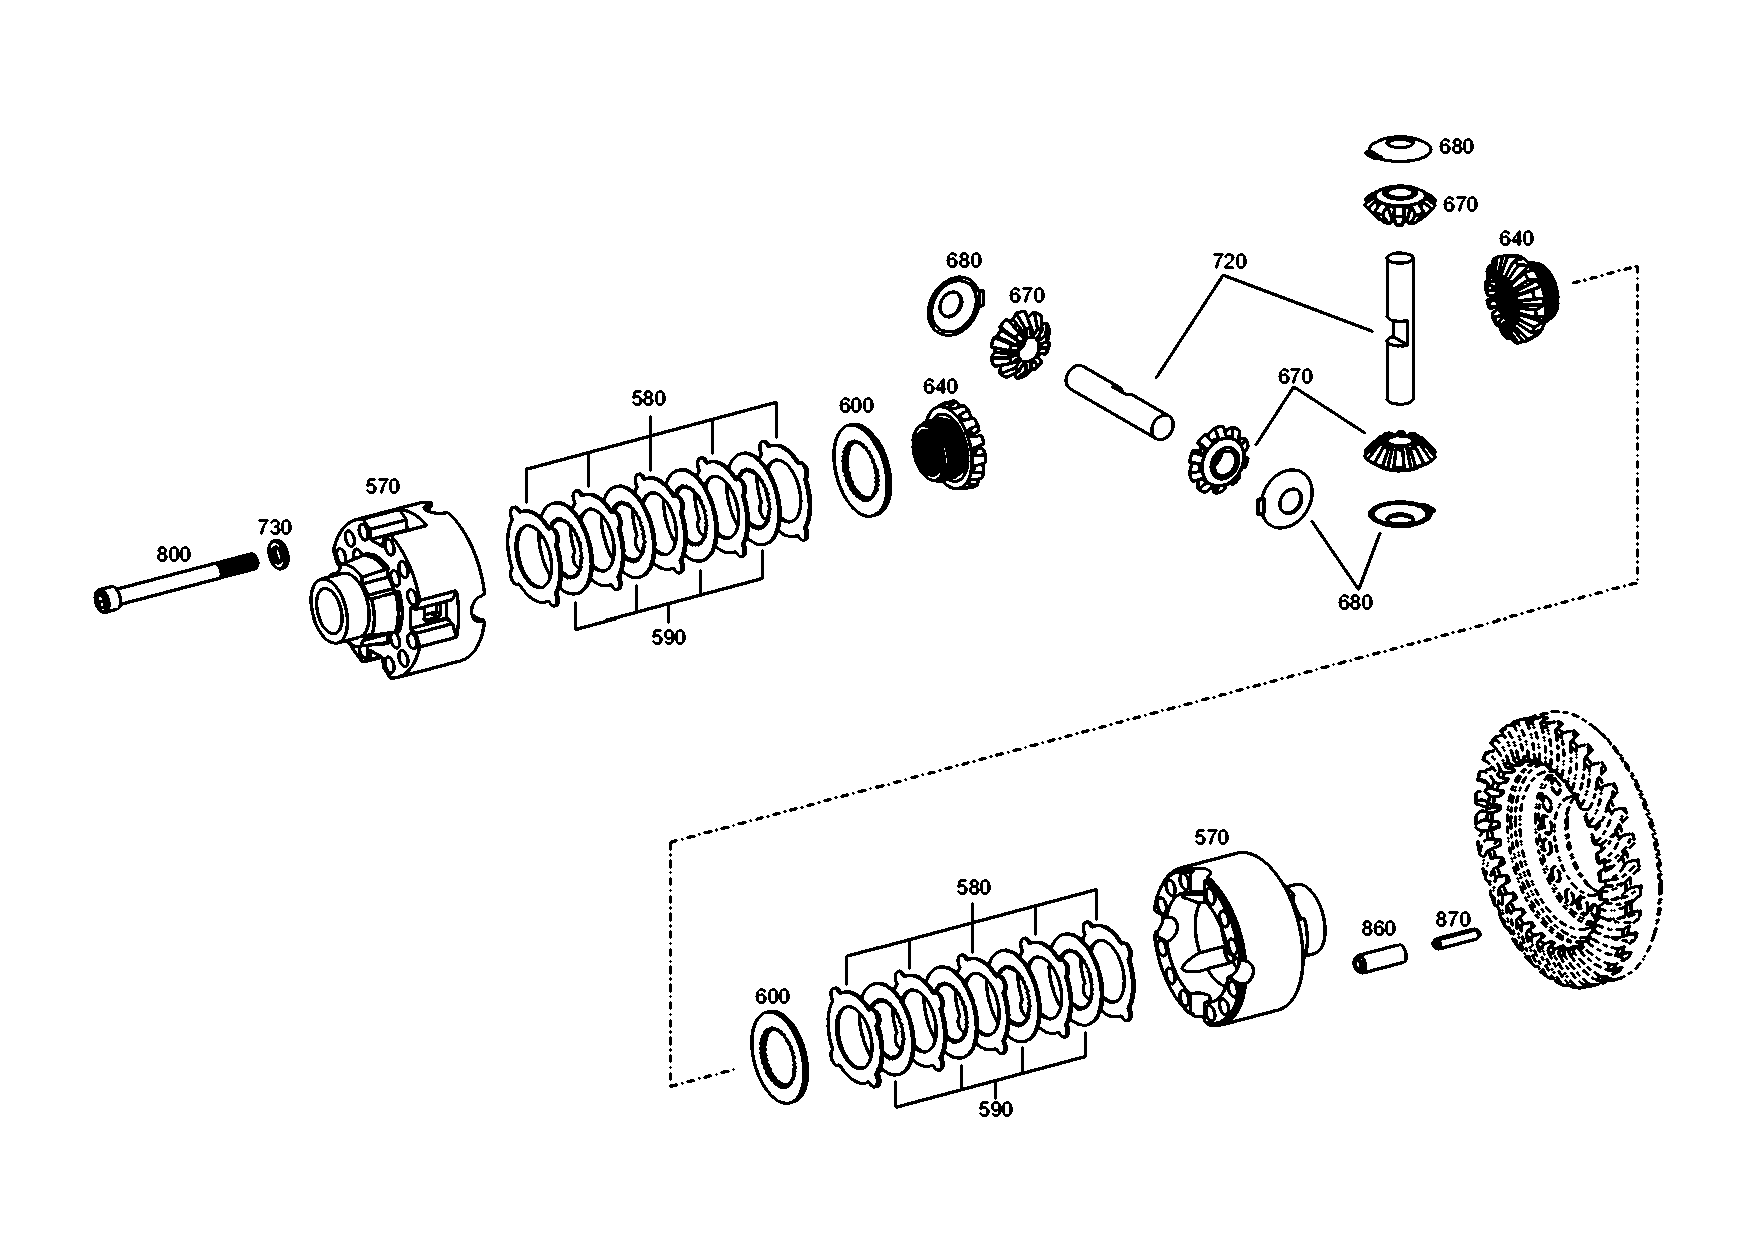 drawing for LIEBHERR GMBH 7623459 - DIFFERENTIAL BEVEL GEAR (figure 2)